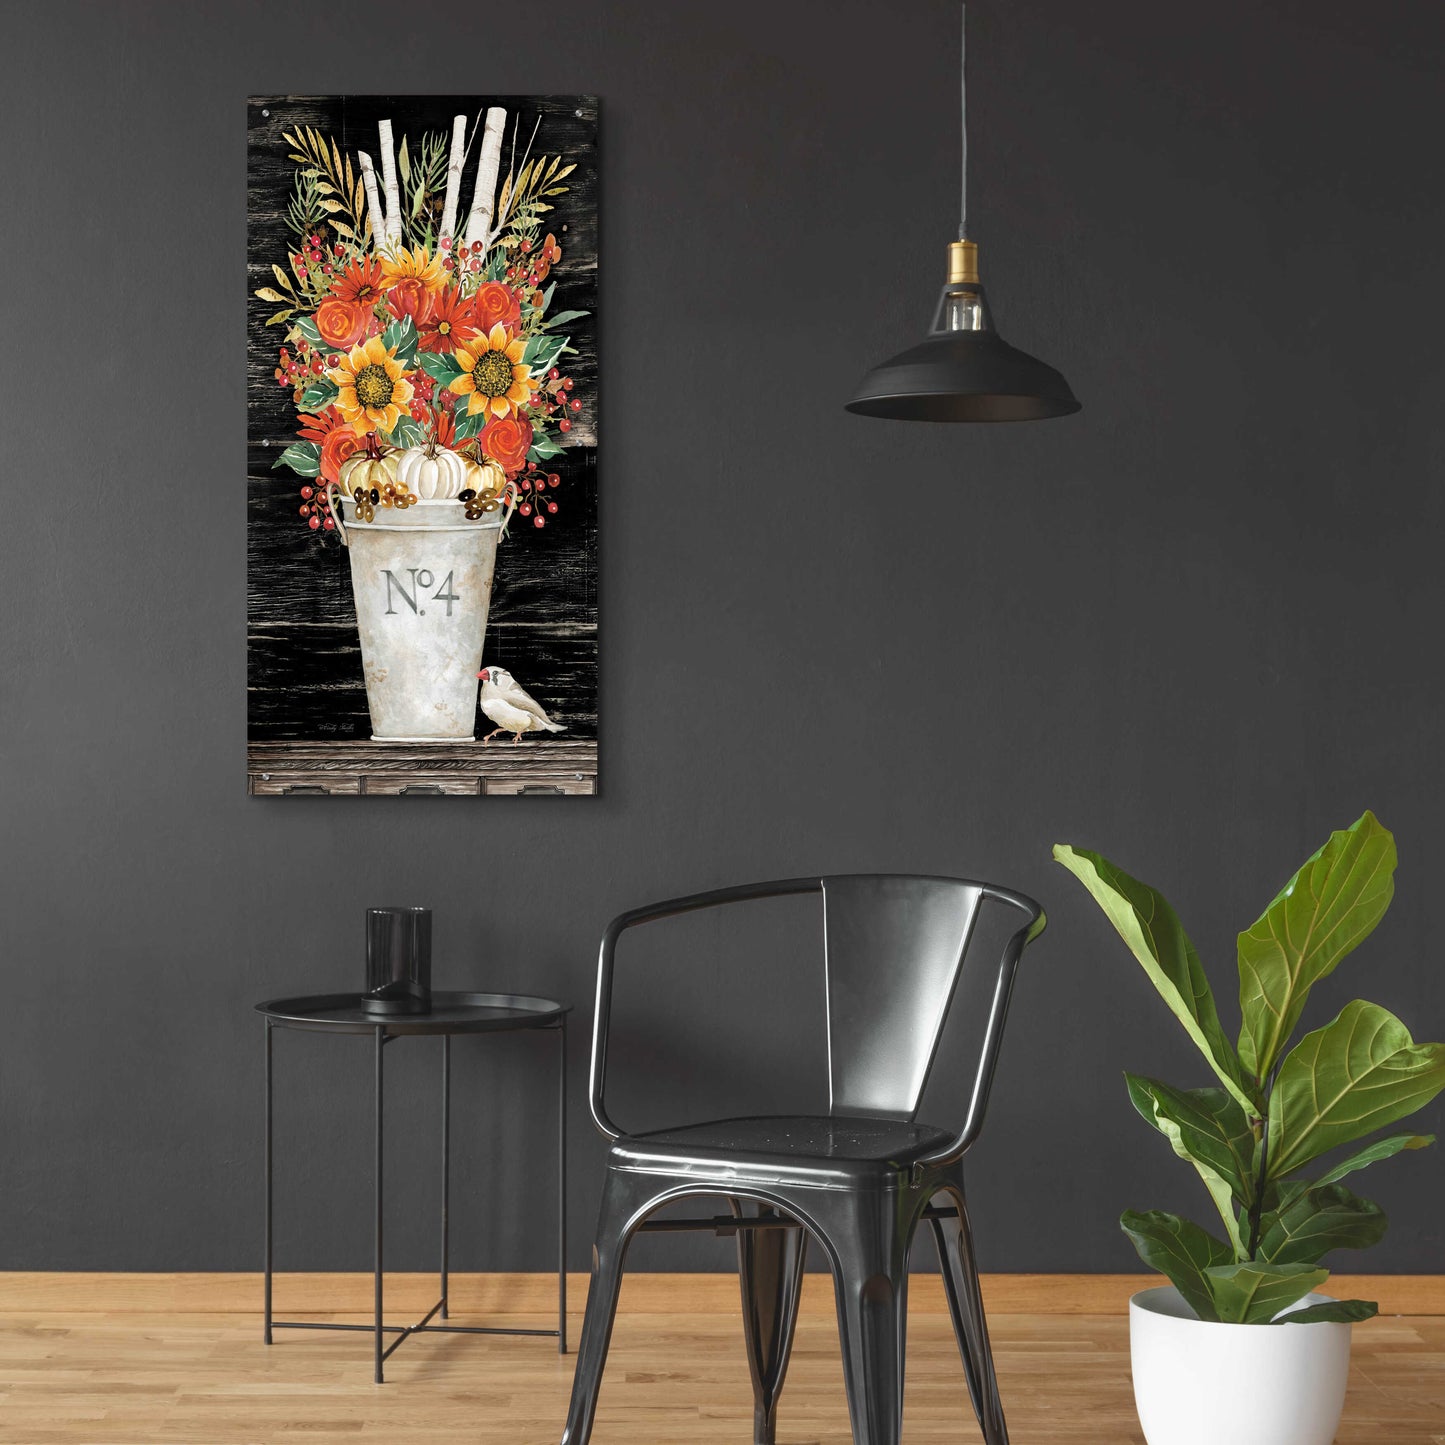 Epic Art 'No. 4 Fall Flowers and Birch 2' by Cindy Jacobs, Acrylic Glass Wall Art,24x48